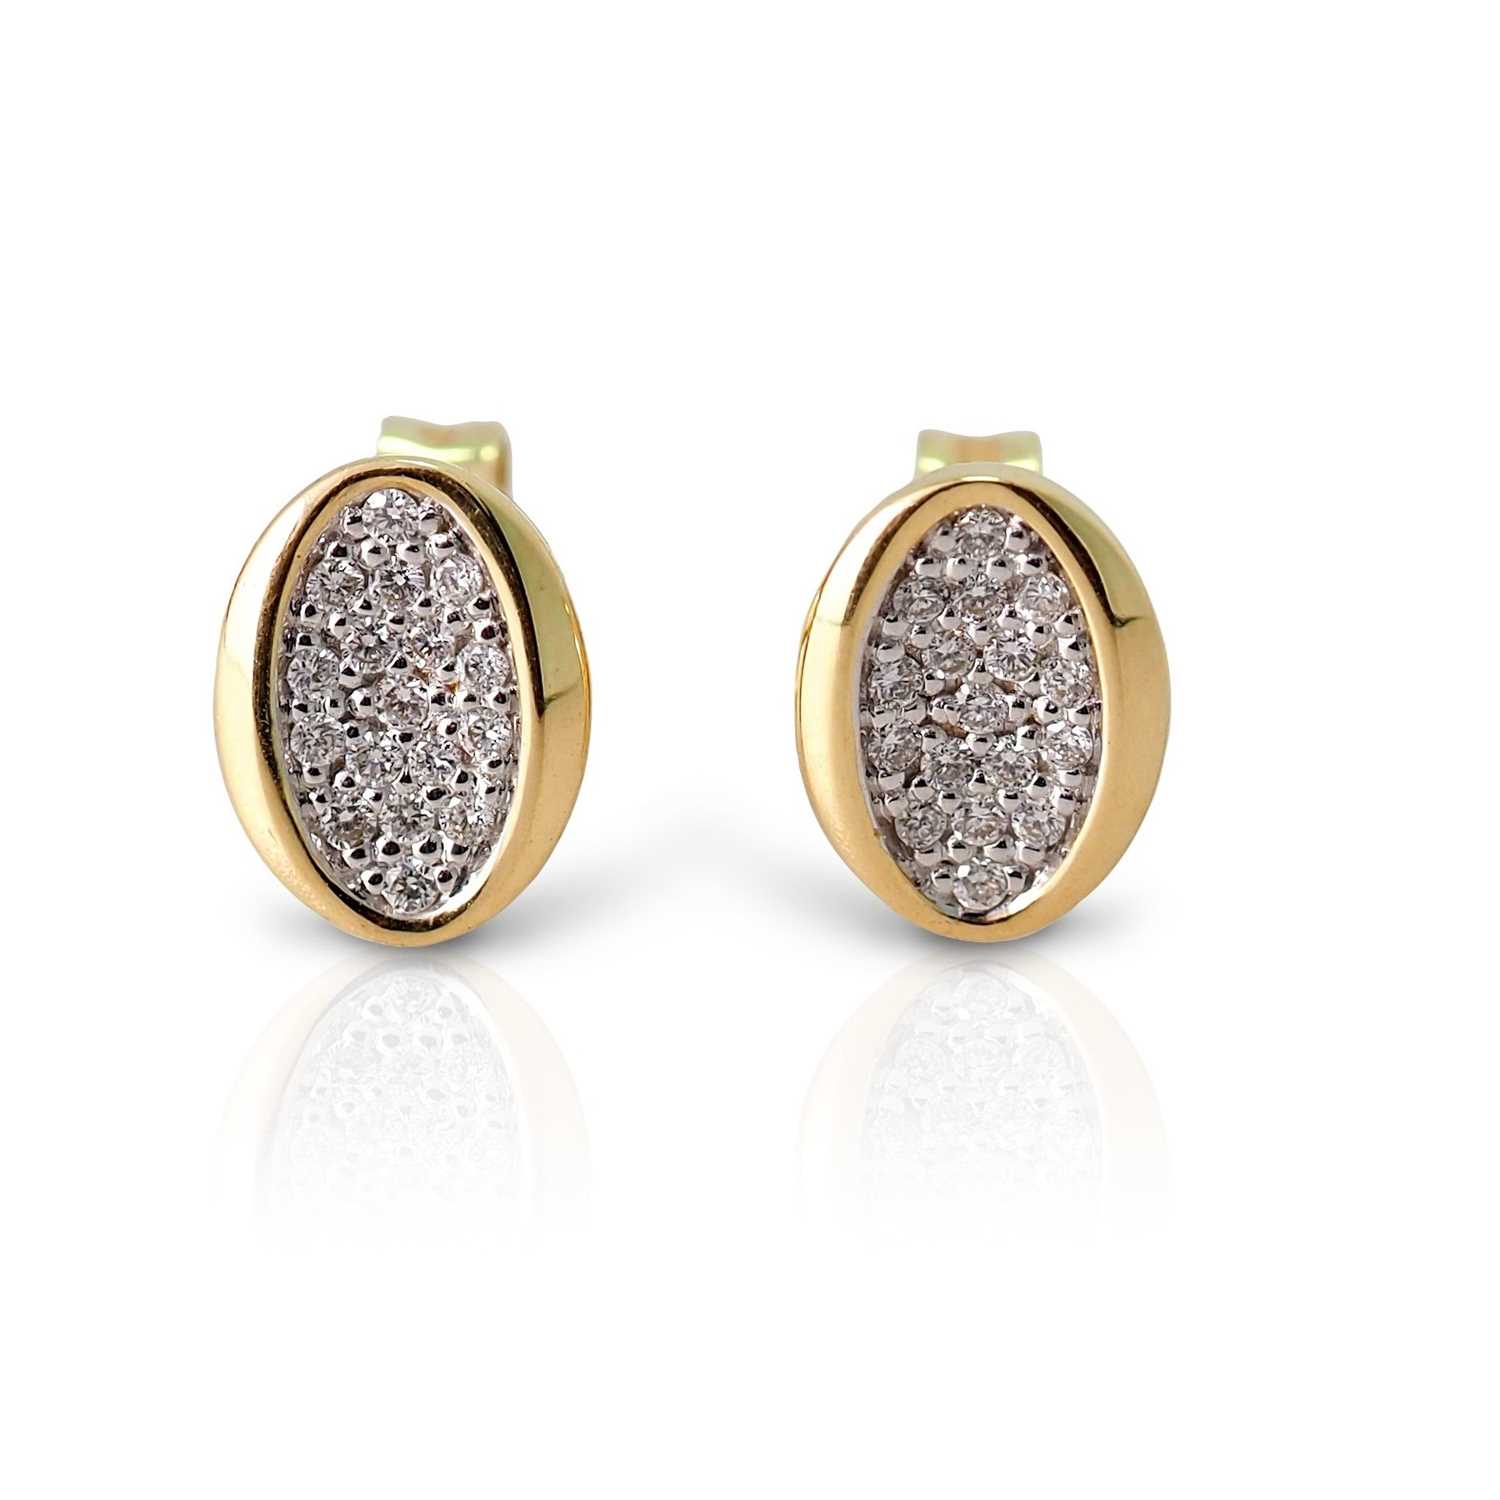 Lot 531 - Pair of 14K Gold Ear Studs with Diamonds